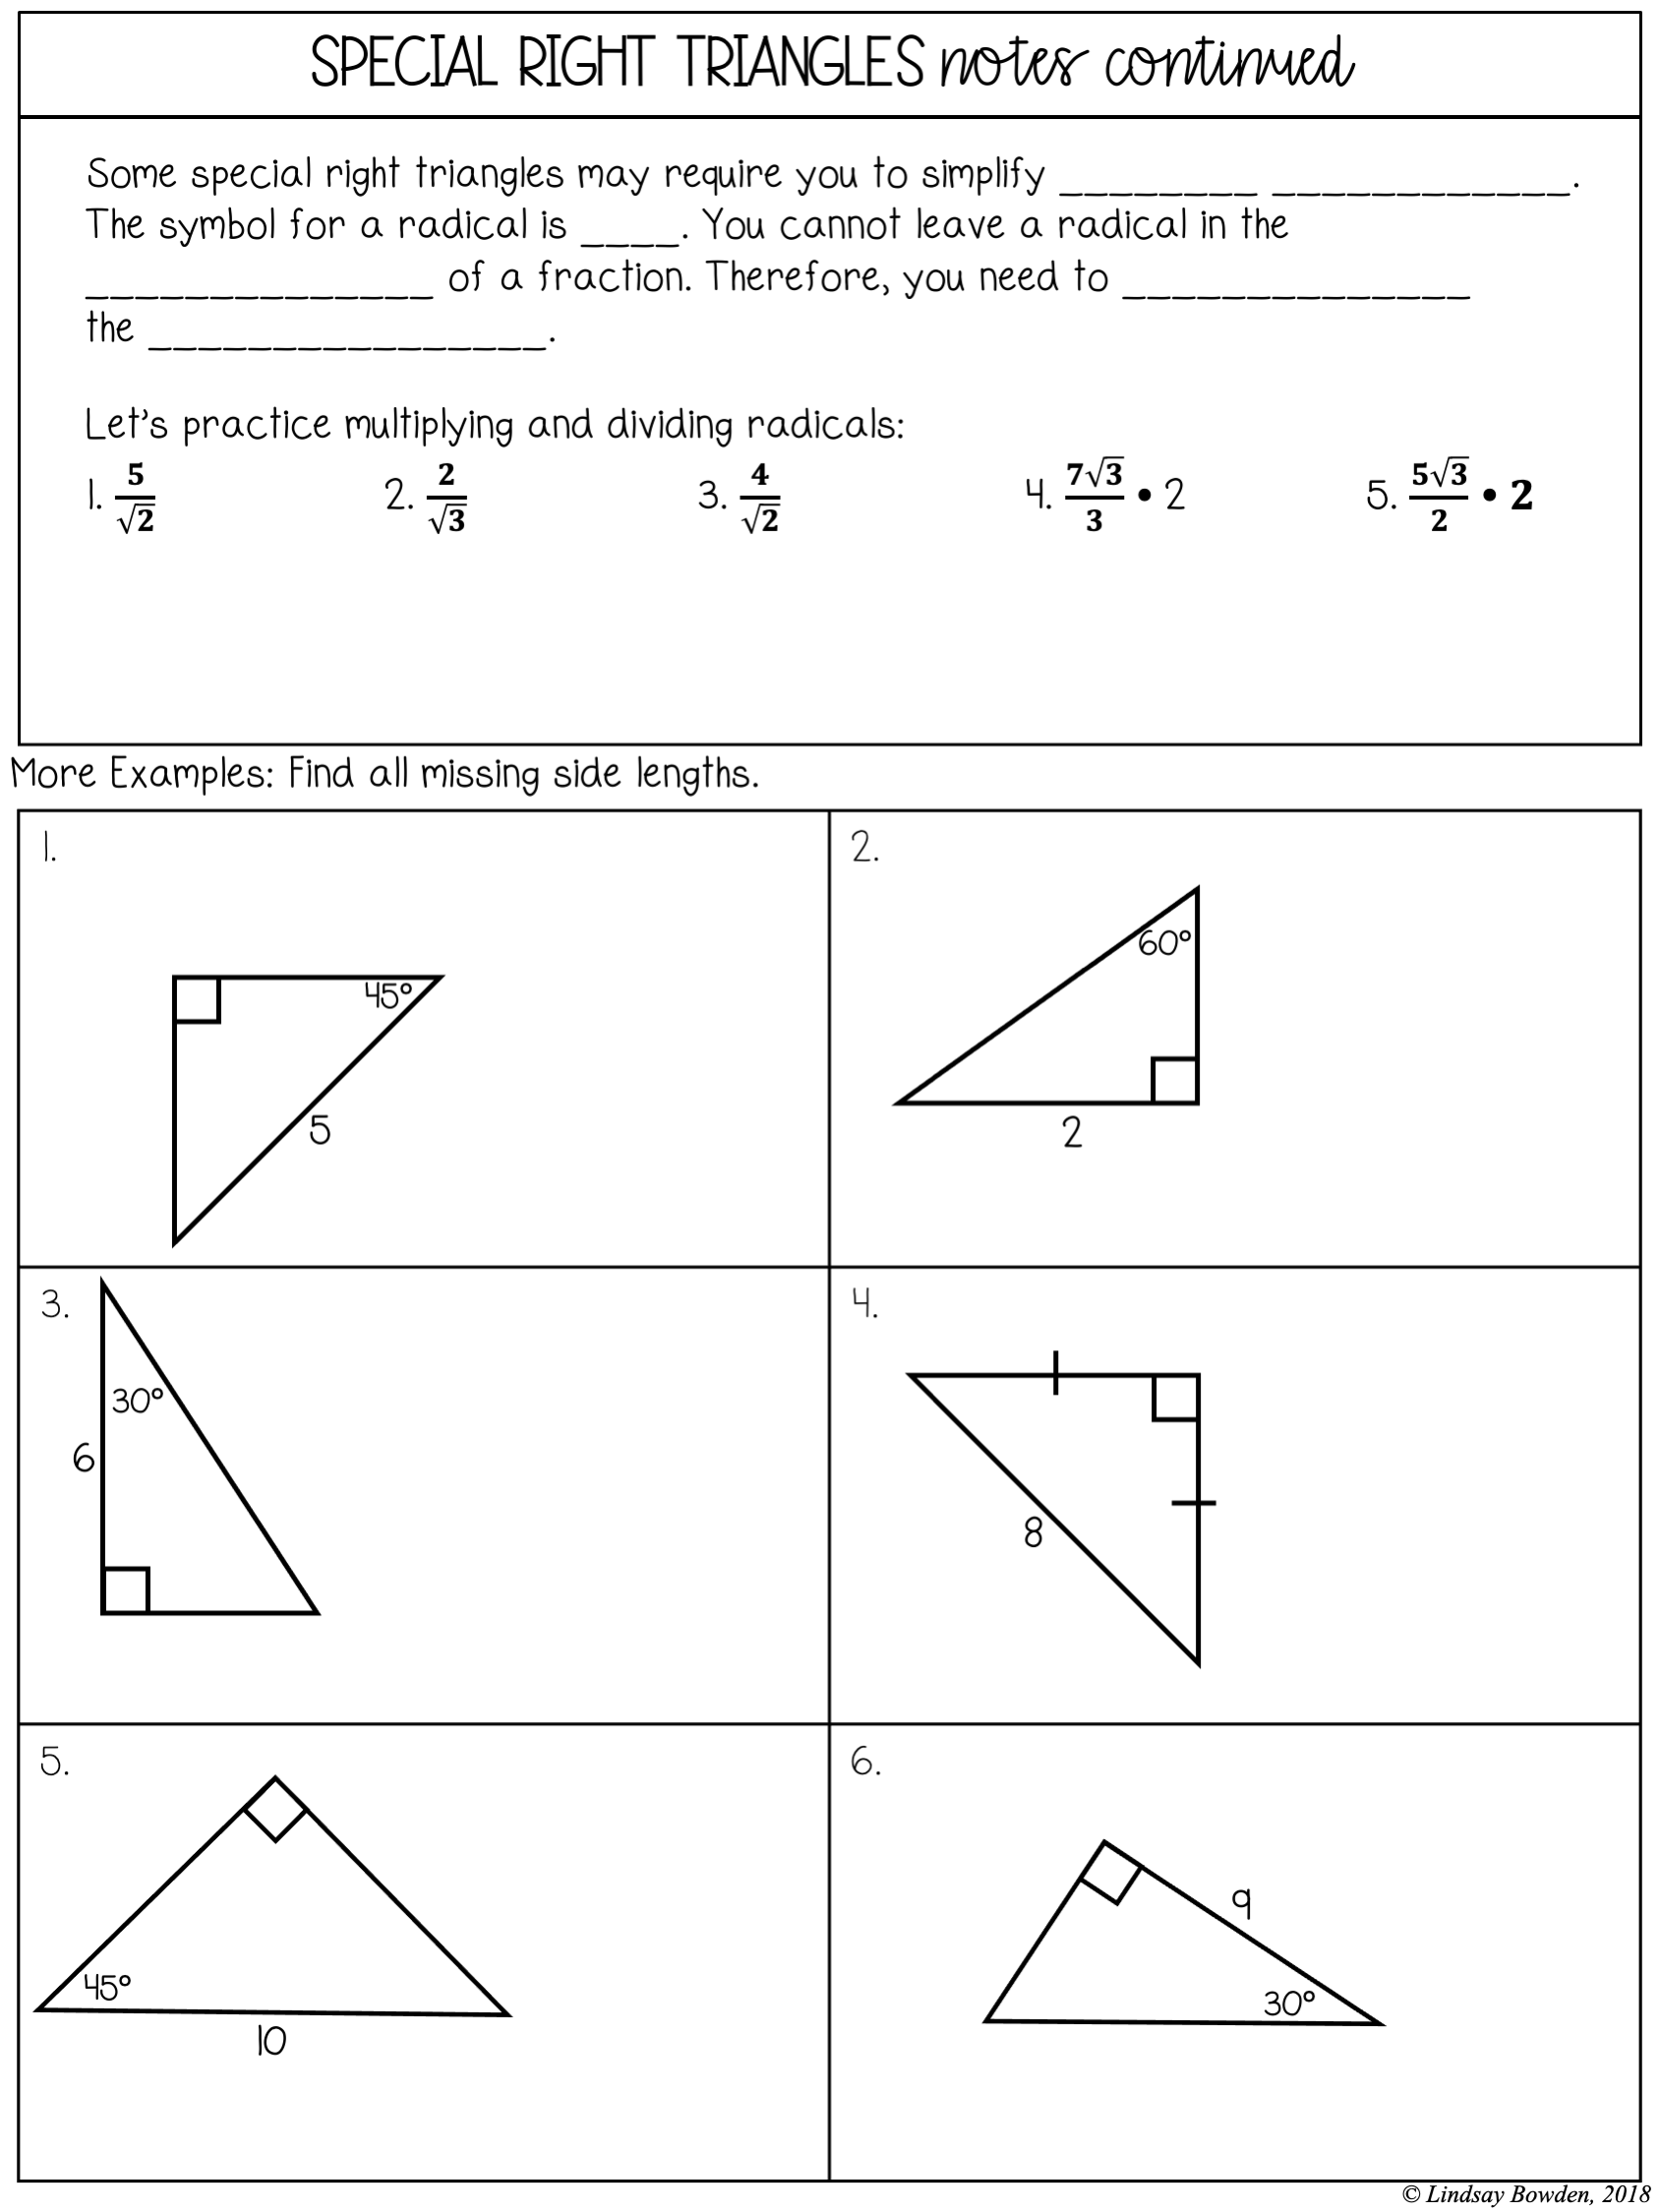 Special Right Triangles Notes and Worksheets - Lindsay Bowden Pertaining To Special Right Triangles Practice Worksheet